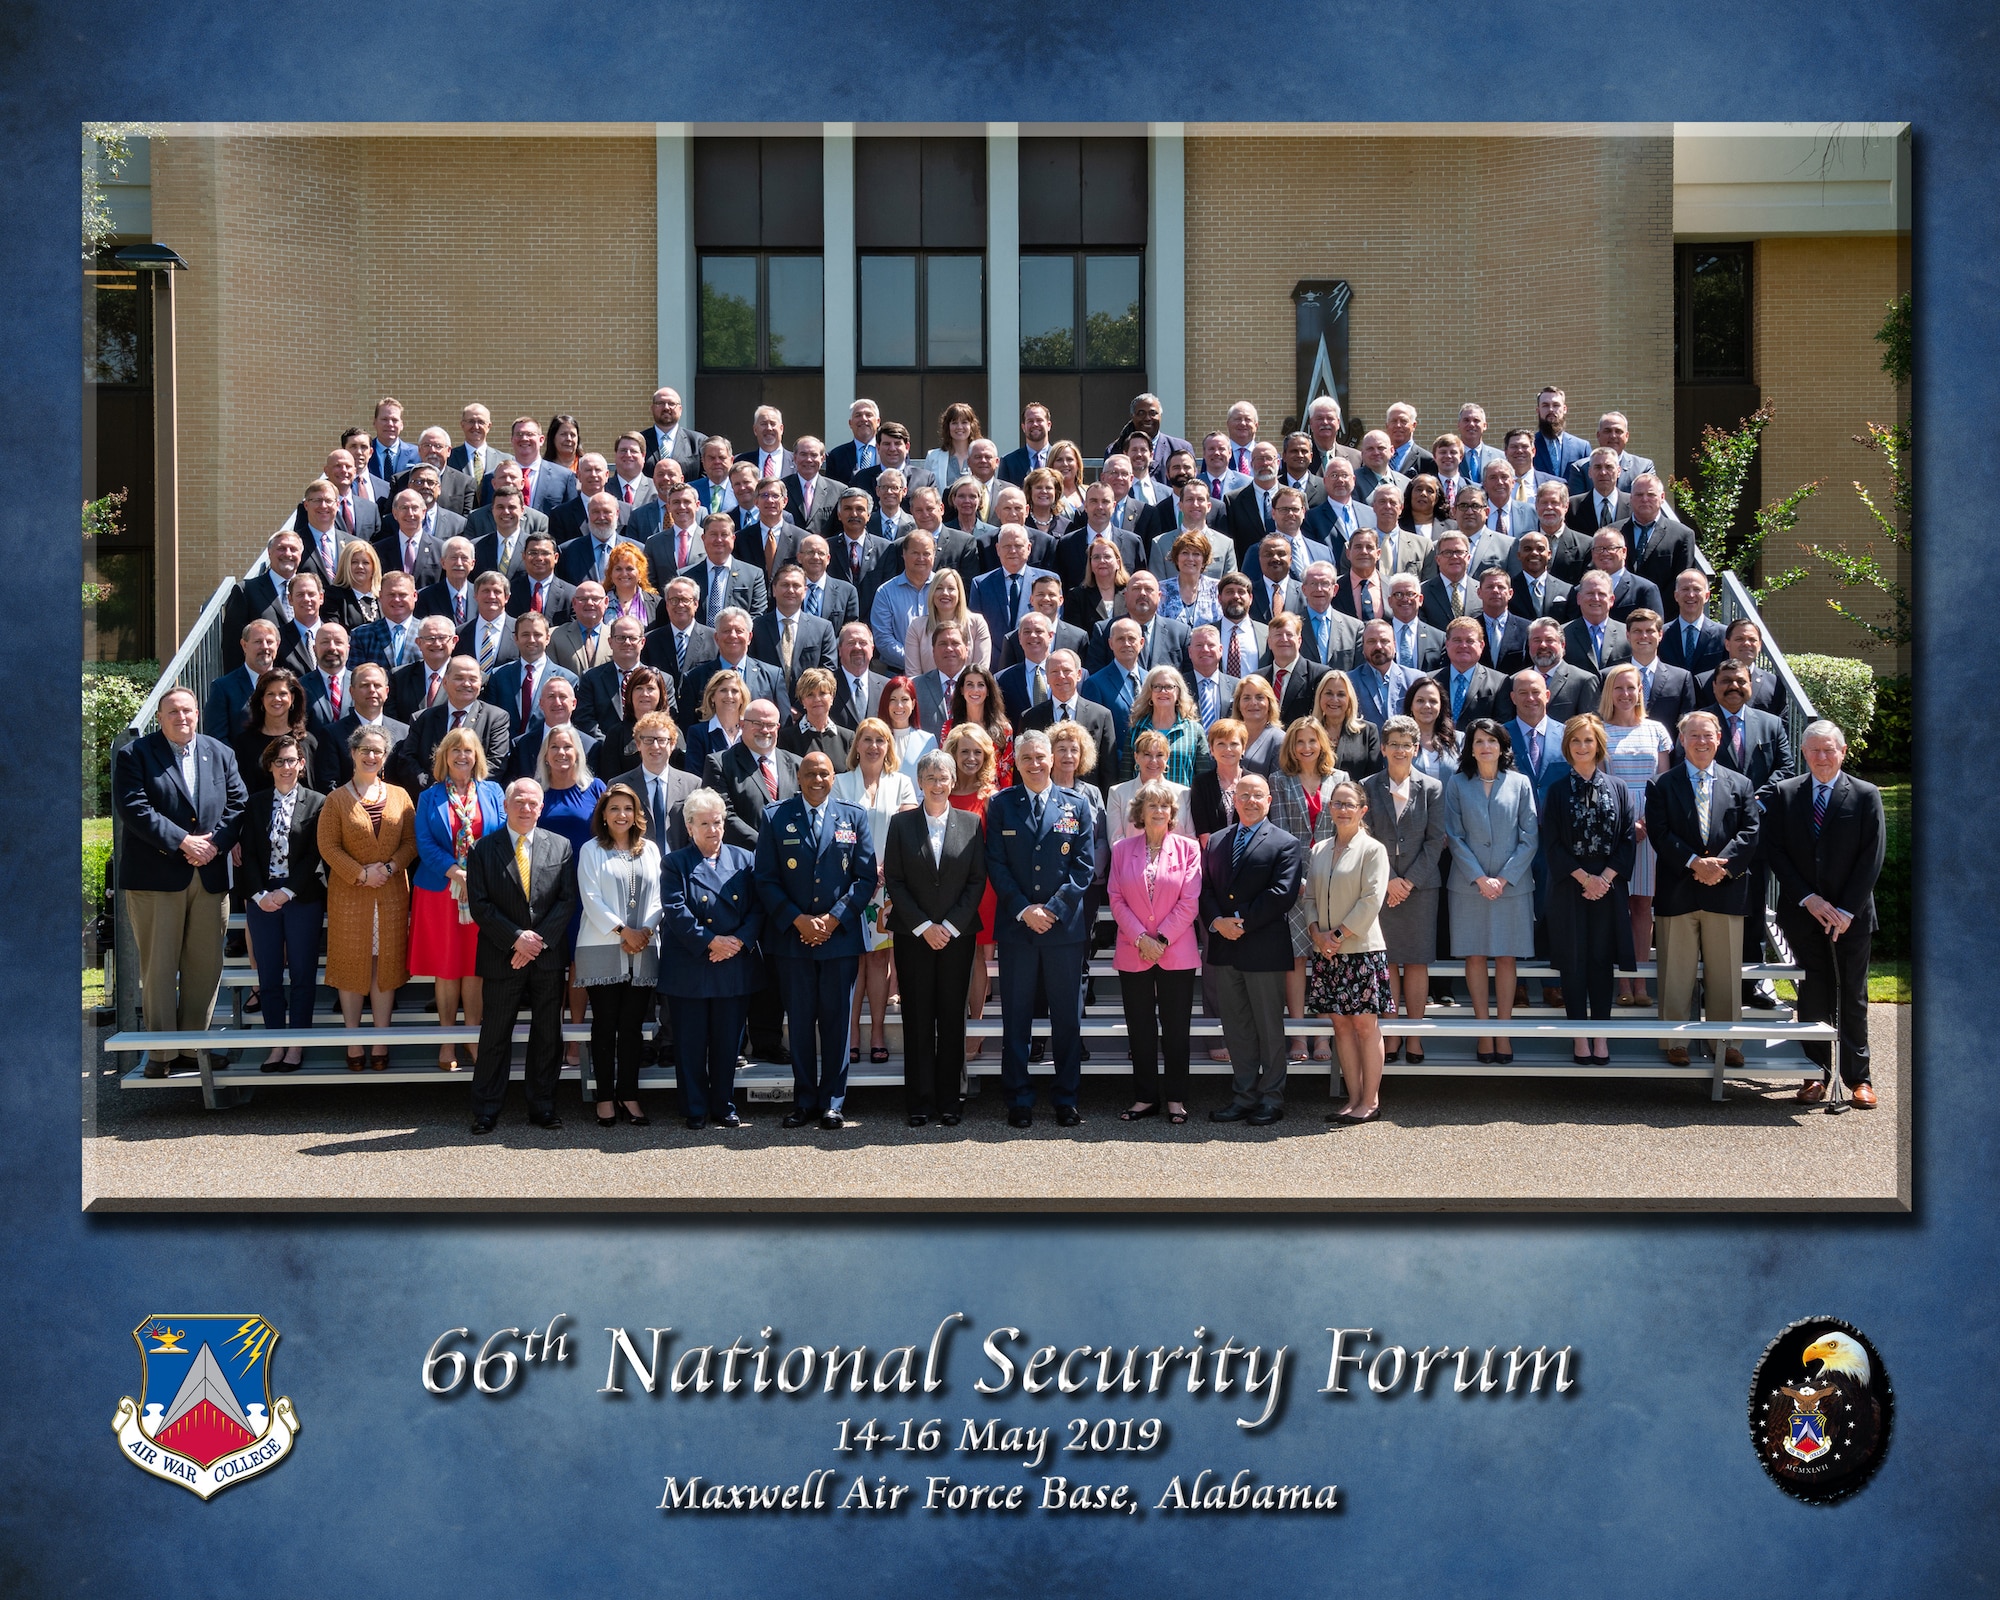 Participants of the 66th annual National Security Forum stand together for a photo May 14, 2019, at Maxwell Air Force Base, Alabama. Hosted by Air University’s Air War College on behalf of the Secretary of the Air Force, NSF enables the sharing of perspectives between civic leaders, senior military officers and experienced government civilians on leadership, strategy, national security and more.